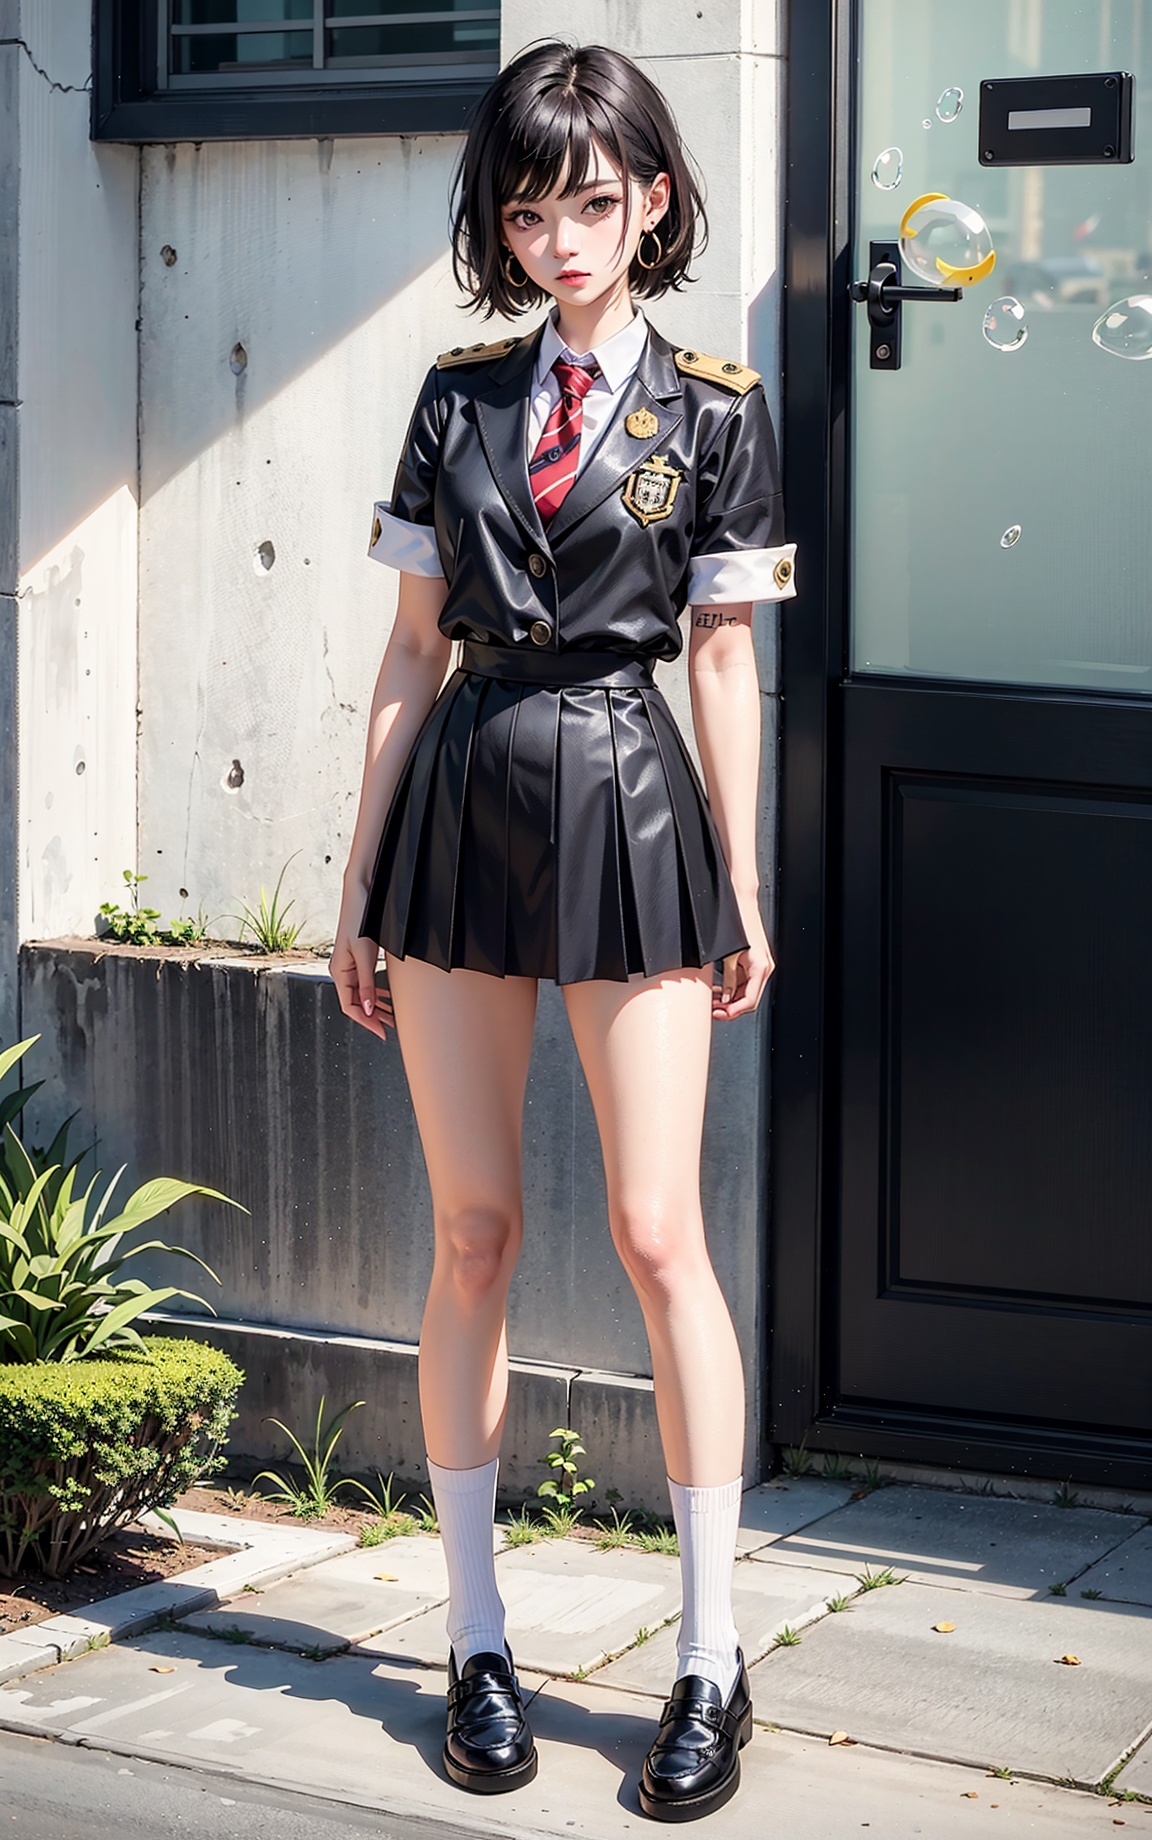 Bad girl, expressionless, young woman, shoulder length short hair, fluffy hair, tattoo, tattoo, jk uniform, tie, ultra short pleated skirt, white bubble socks, leather shoes, earrings, complete body